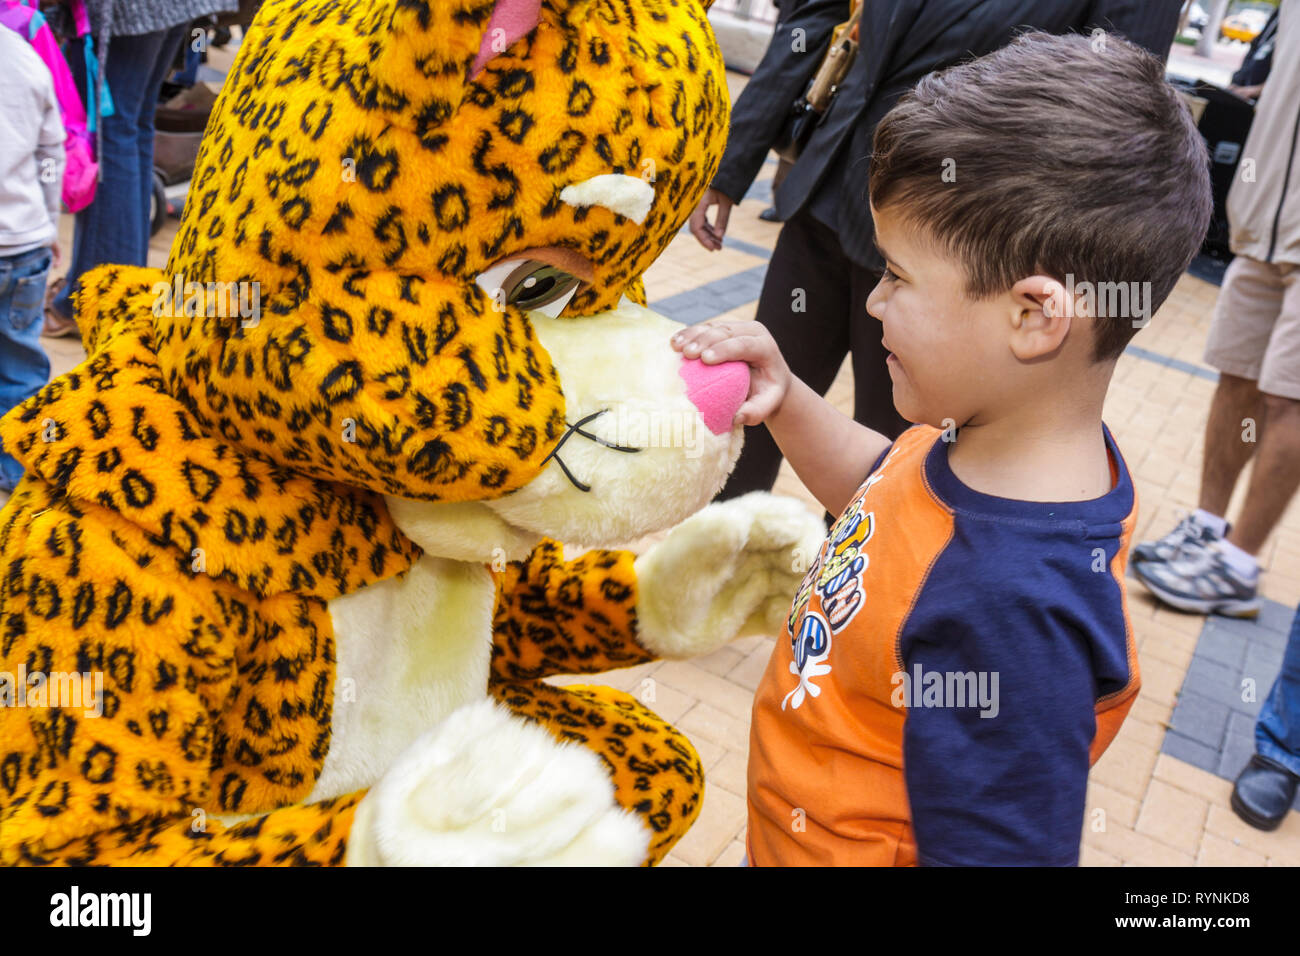 Miami Florida,Adrienne Arsht Center for Performing Arts,Free Family Fest,festival,literary character,leopard,costume,child,boy boys,male kid kids chil Stock Photo